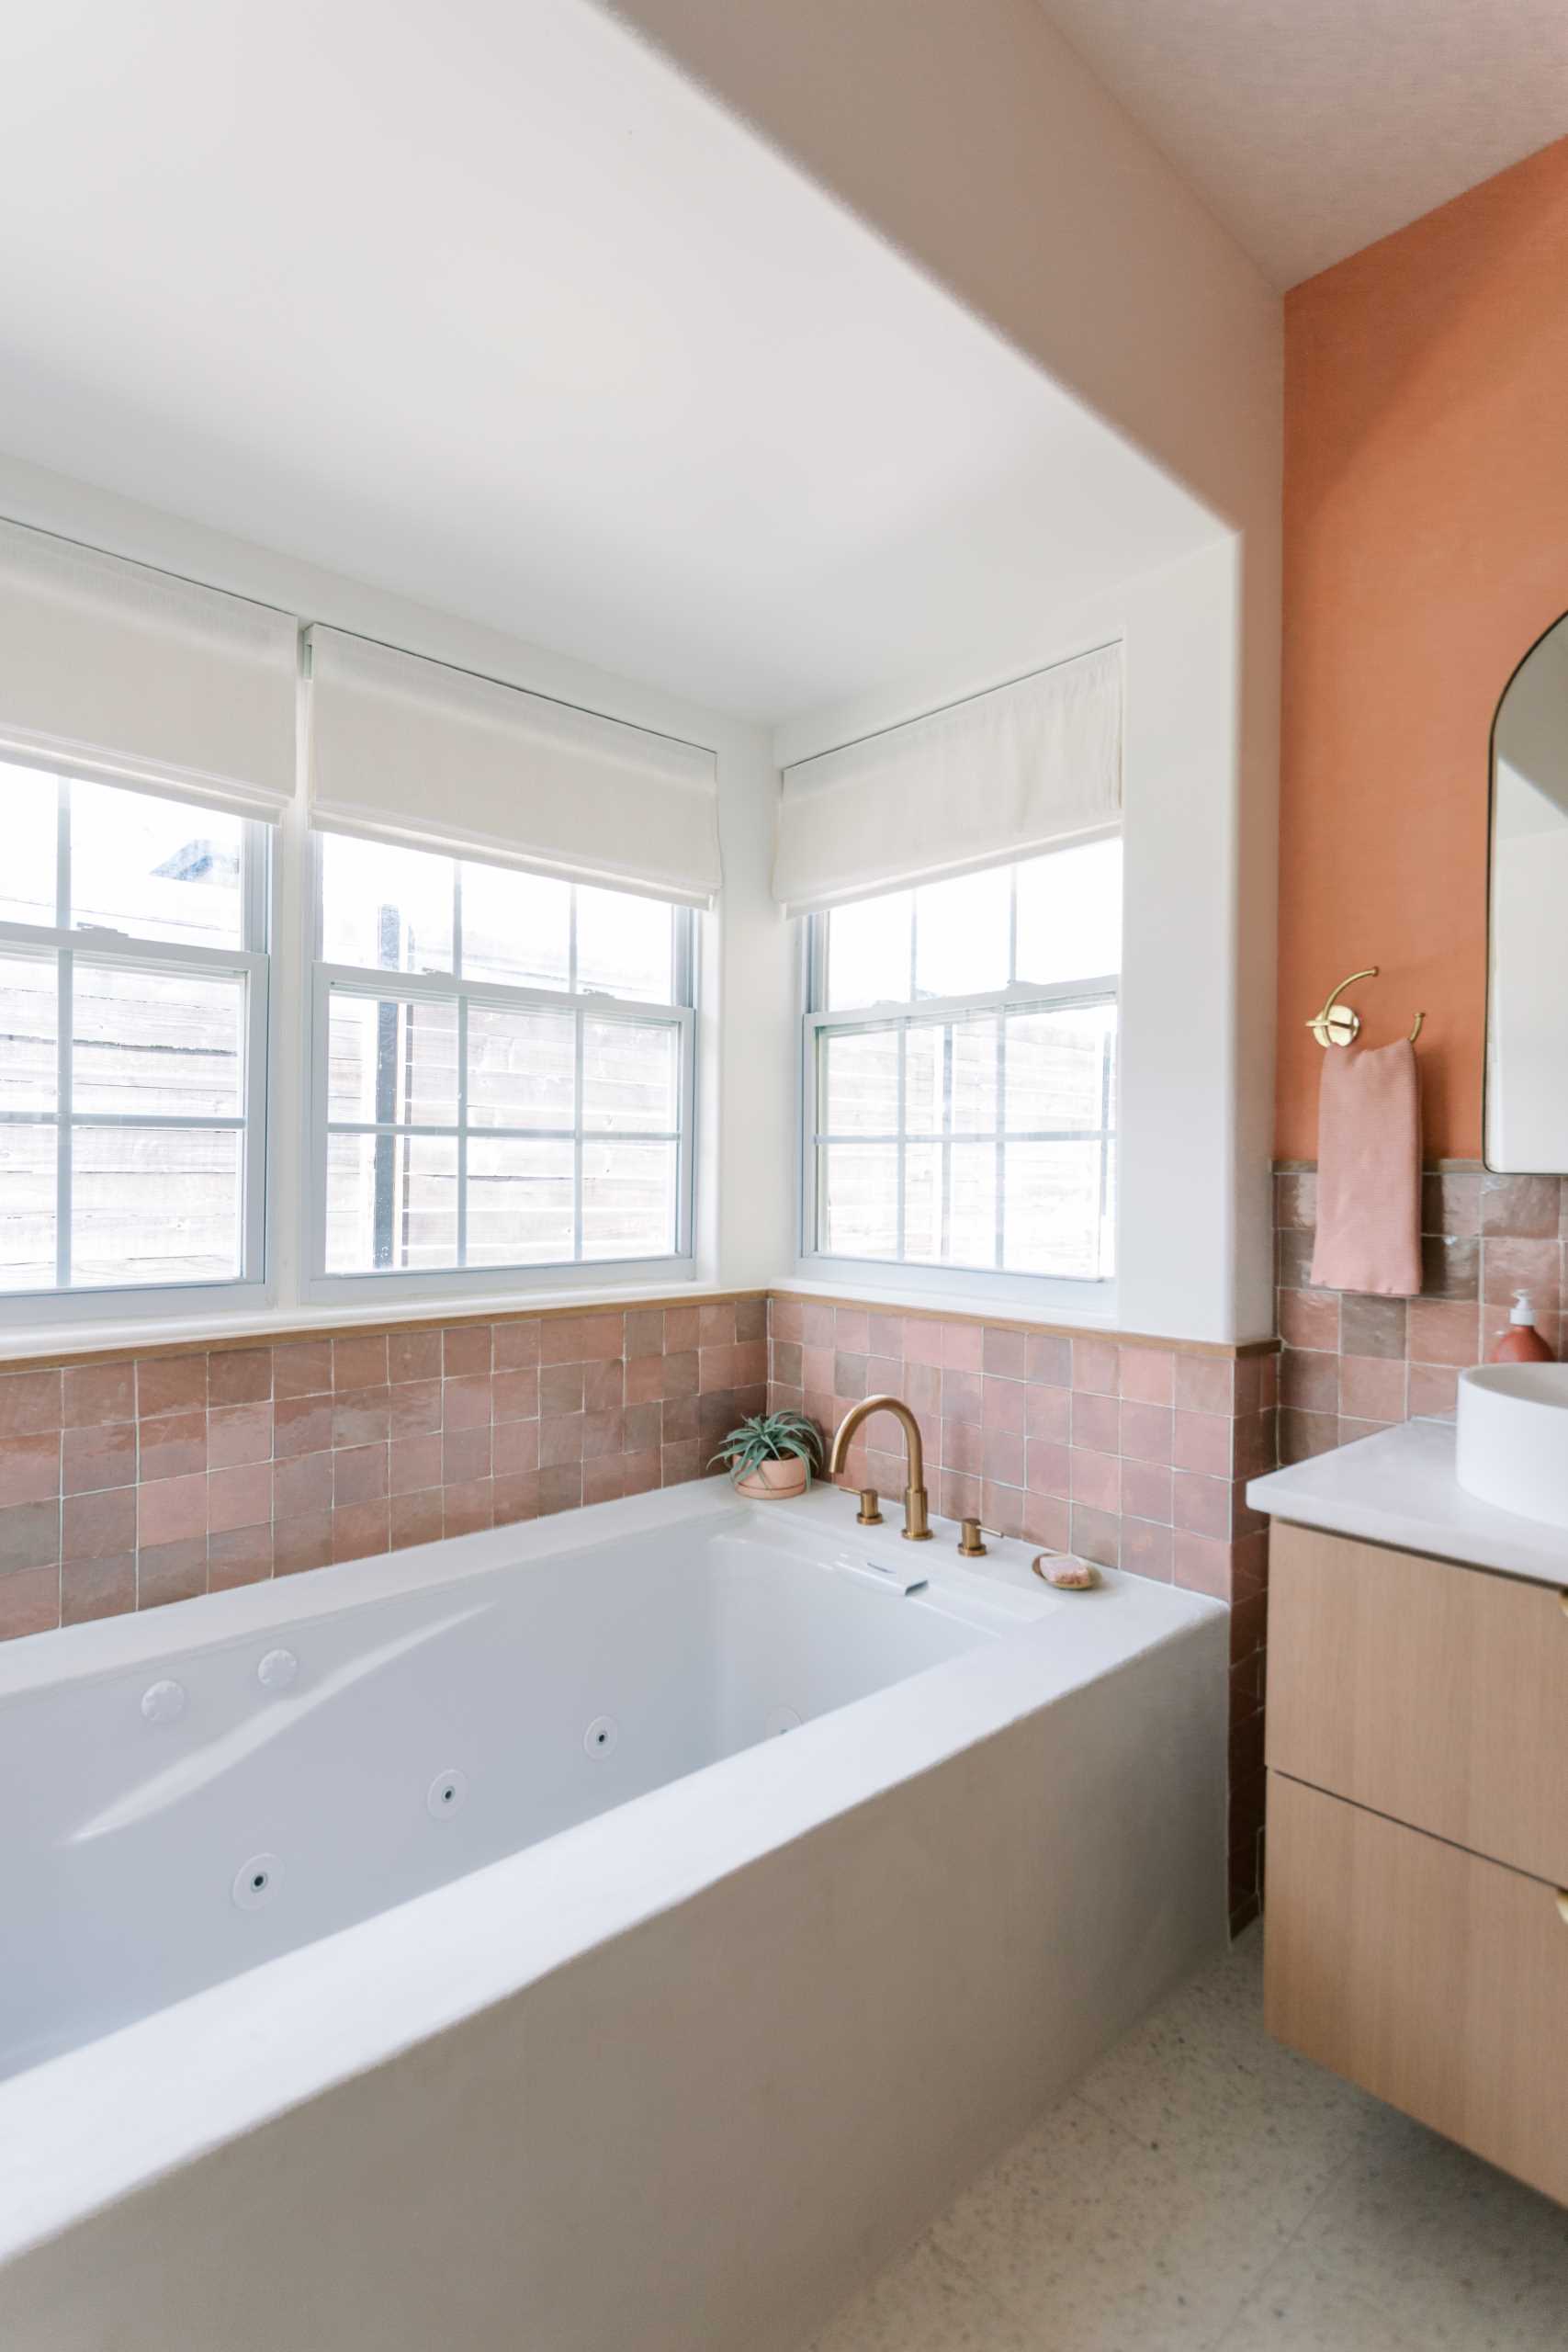 A contemporary bathroom with built-in bathtub and zellige tile surround.